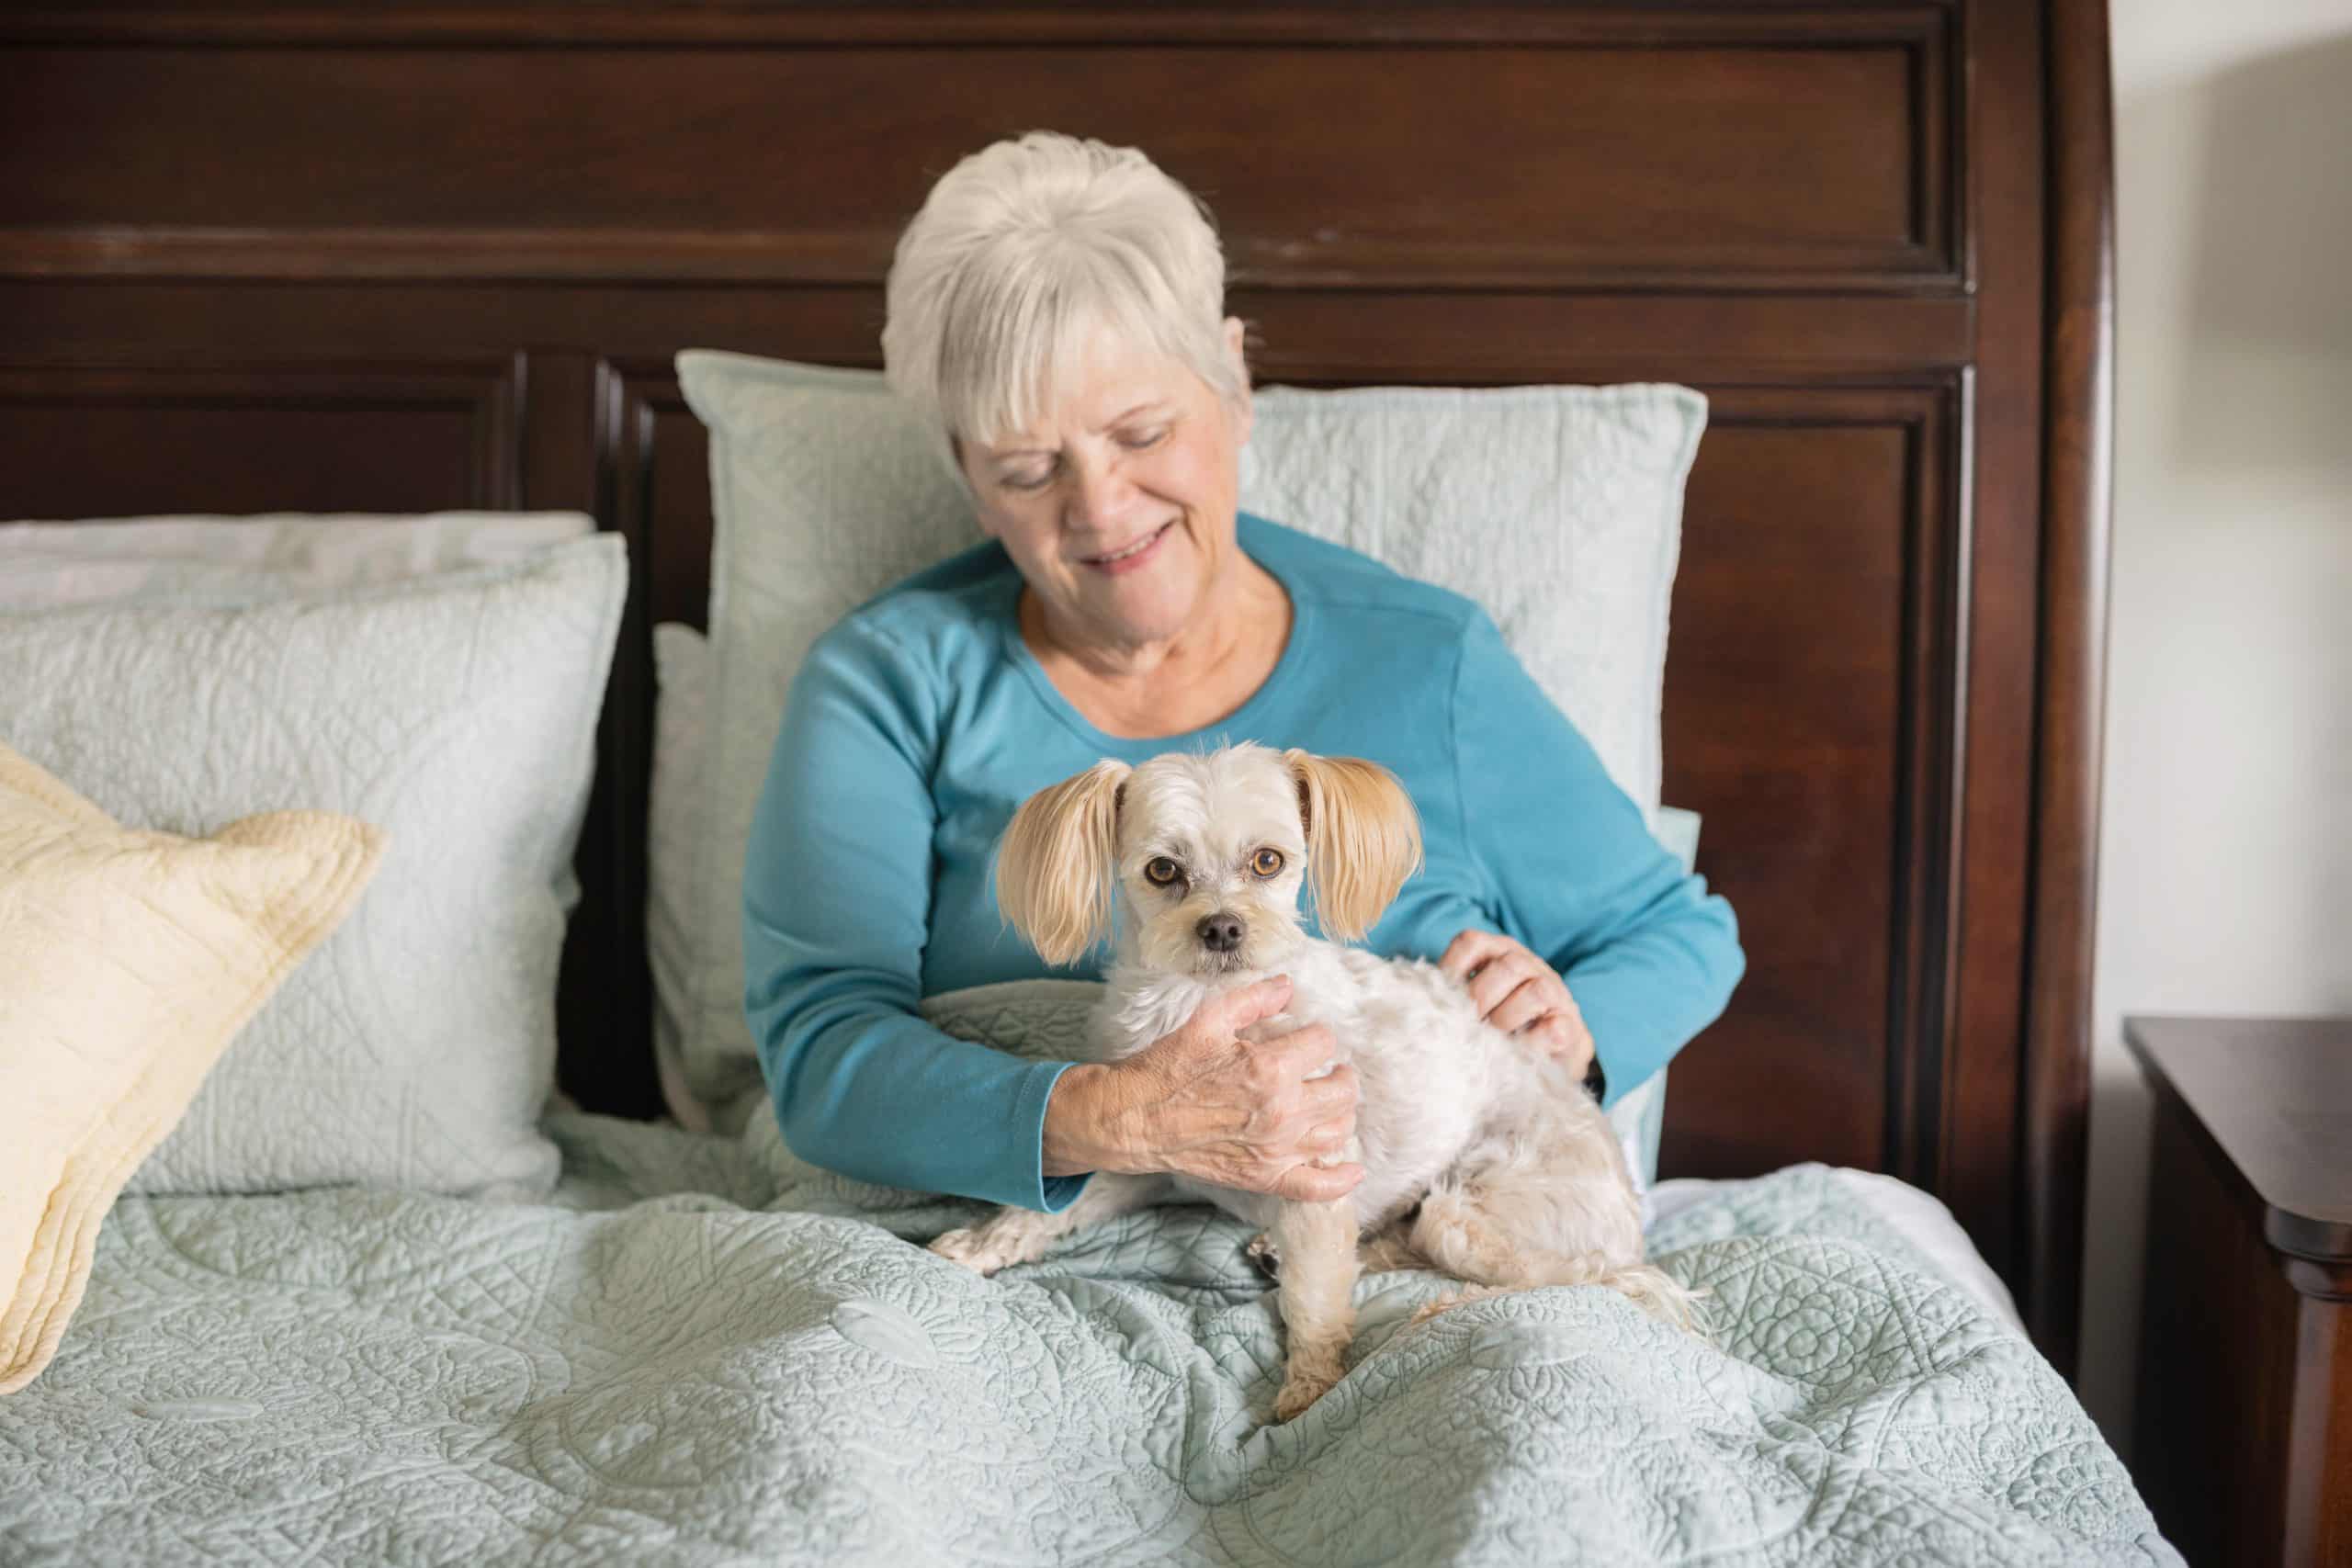 Should You Bring Pets to Visit in Hospice Care?